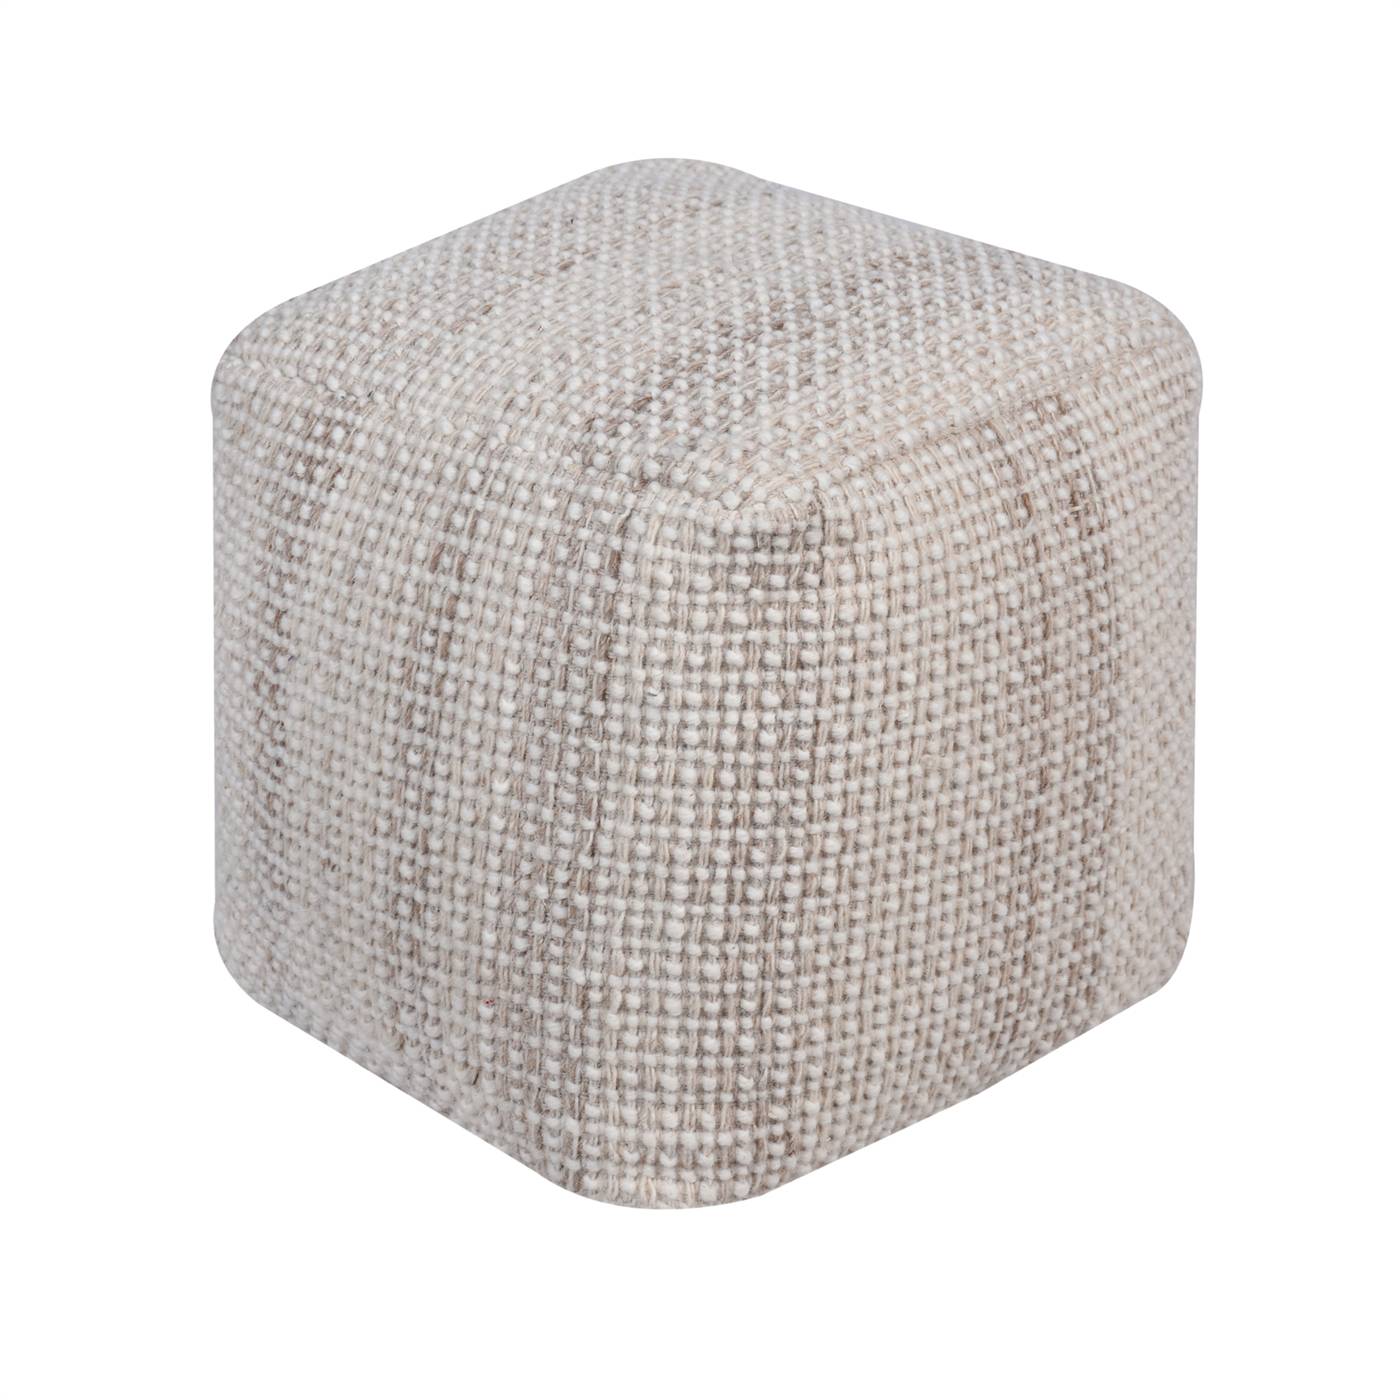 Highland Pouf, 40x40x40 cm, Natural White, Wool, Hand Woven, Handwoven, All Loop